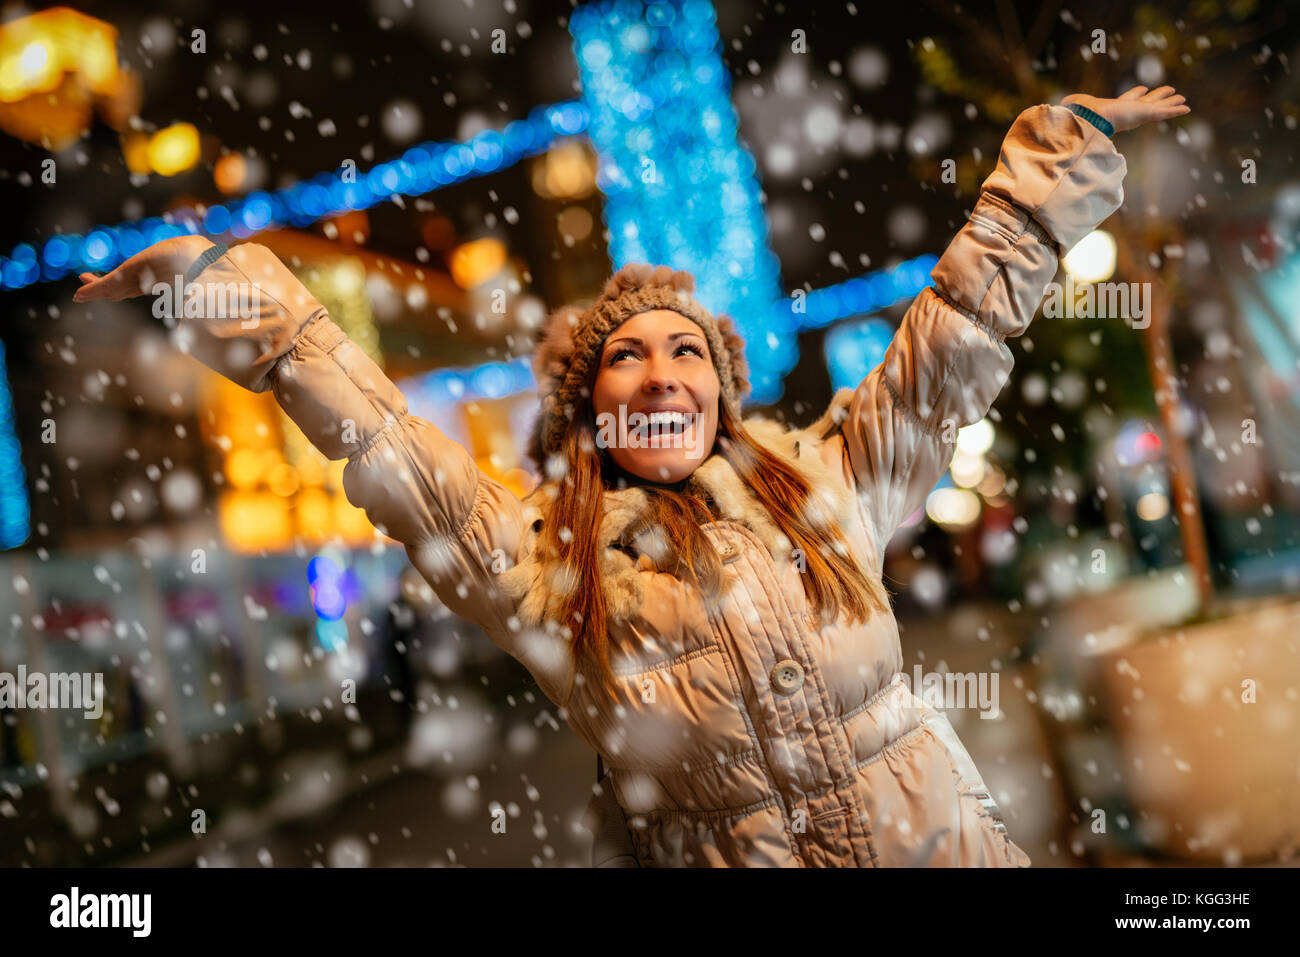 Cheerful beautiful young woman in warm clothing having fun while snowing in winter holiday time. Stock Photo